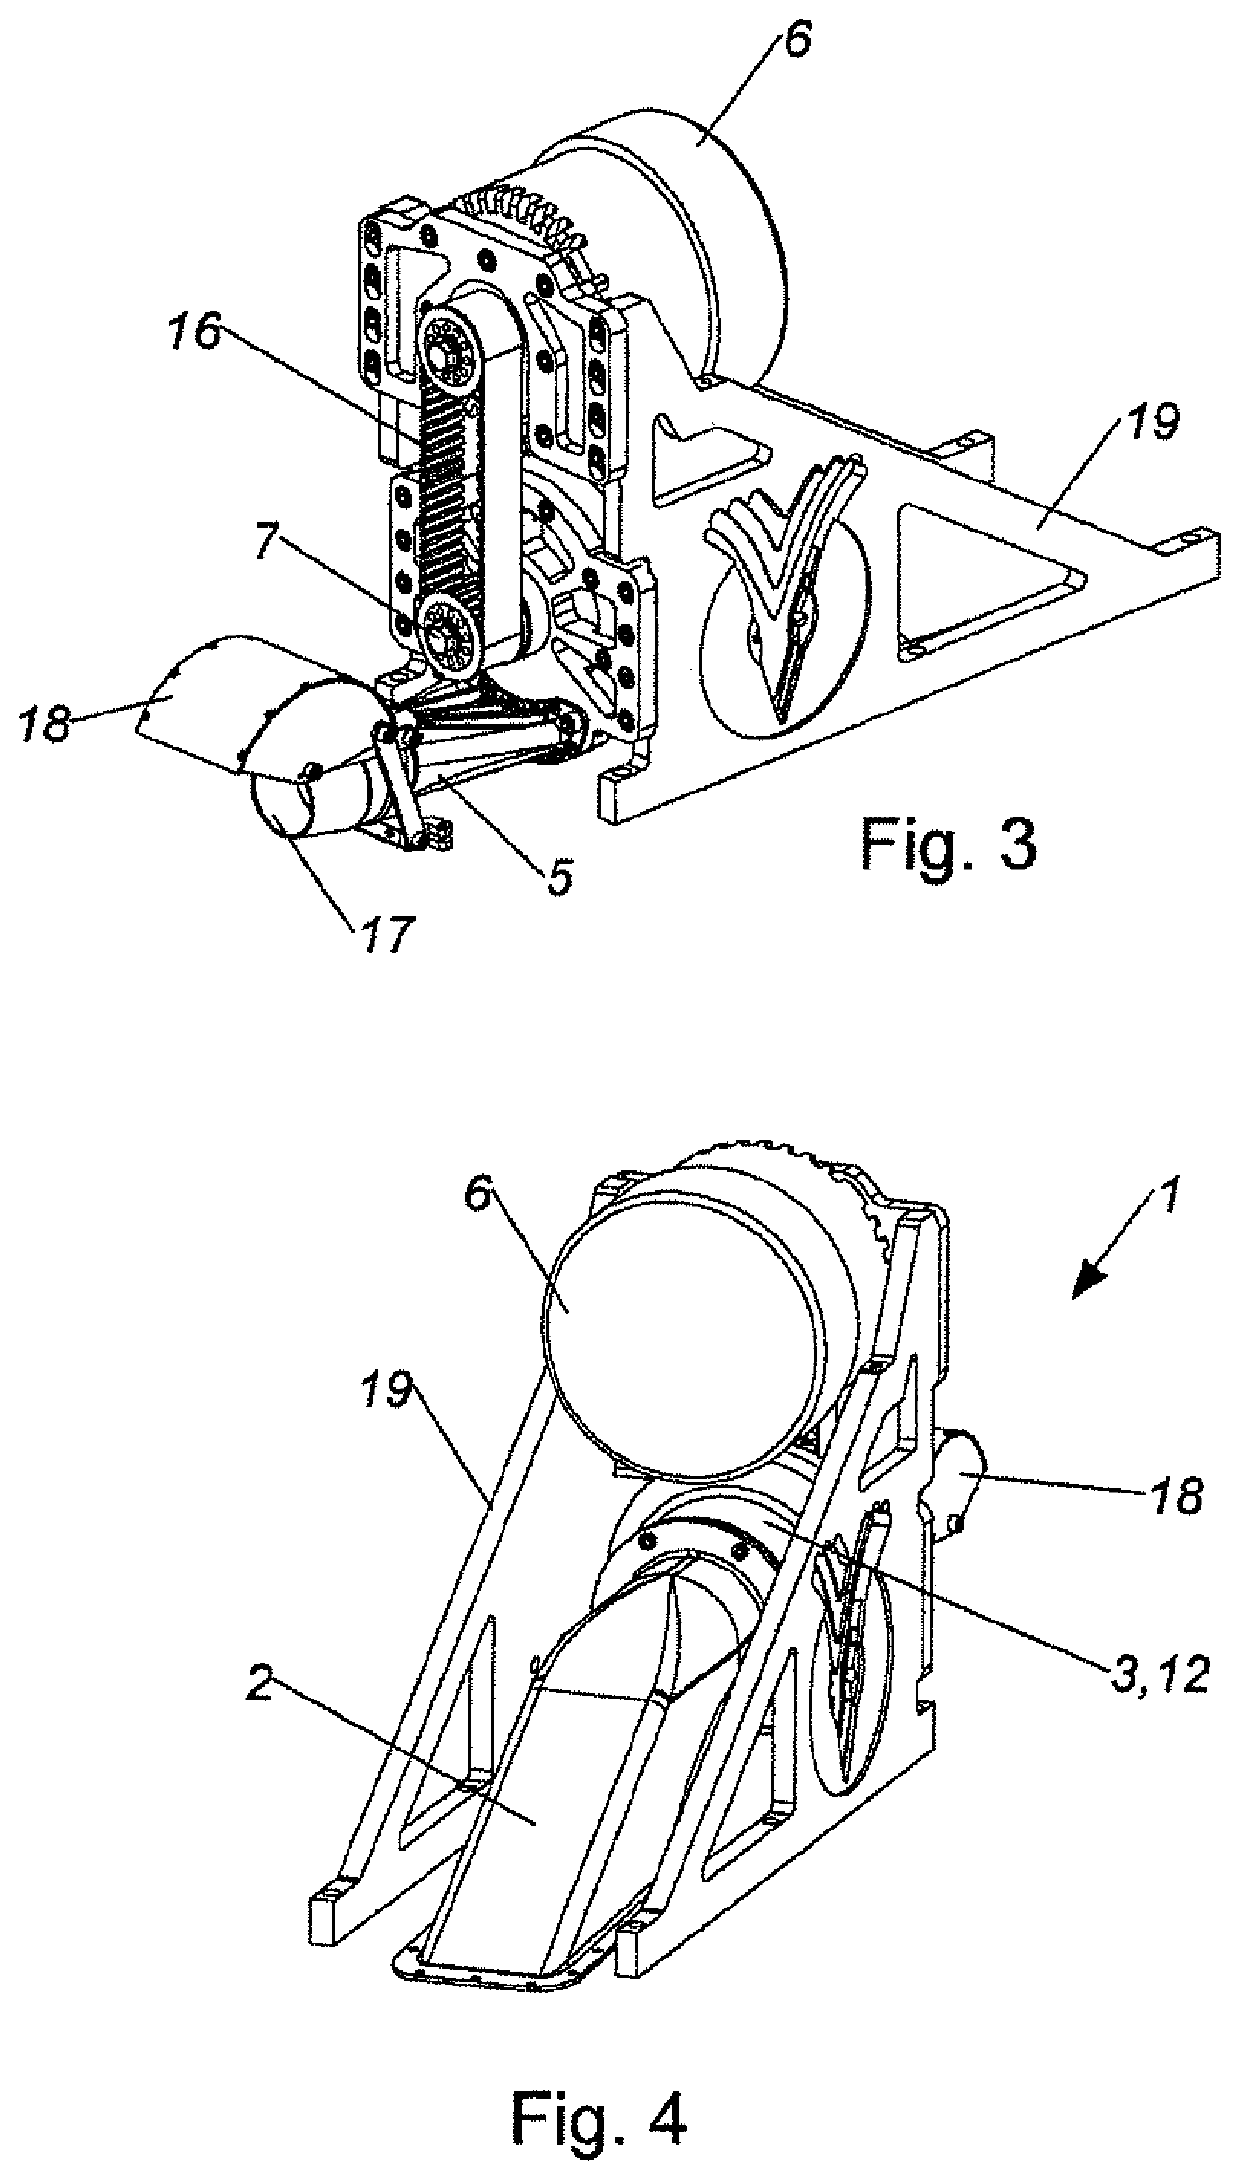 Waterjet propulsion system and watercraft having a waterjet propulsion system